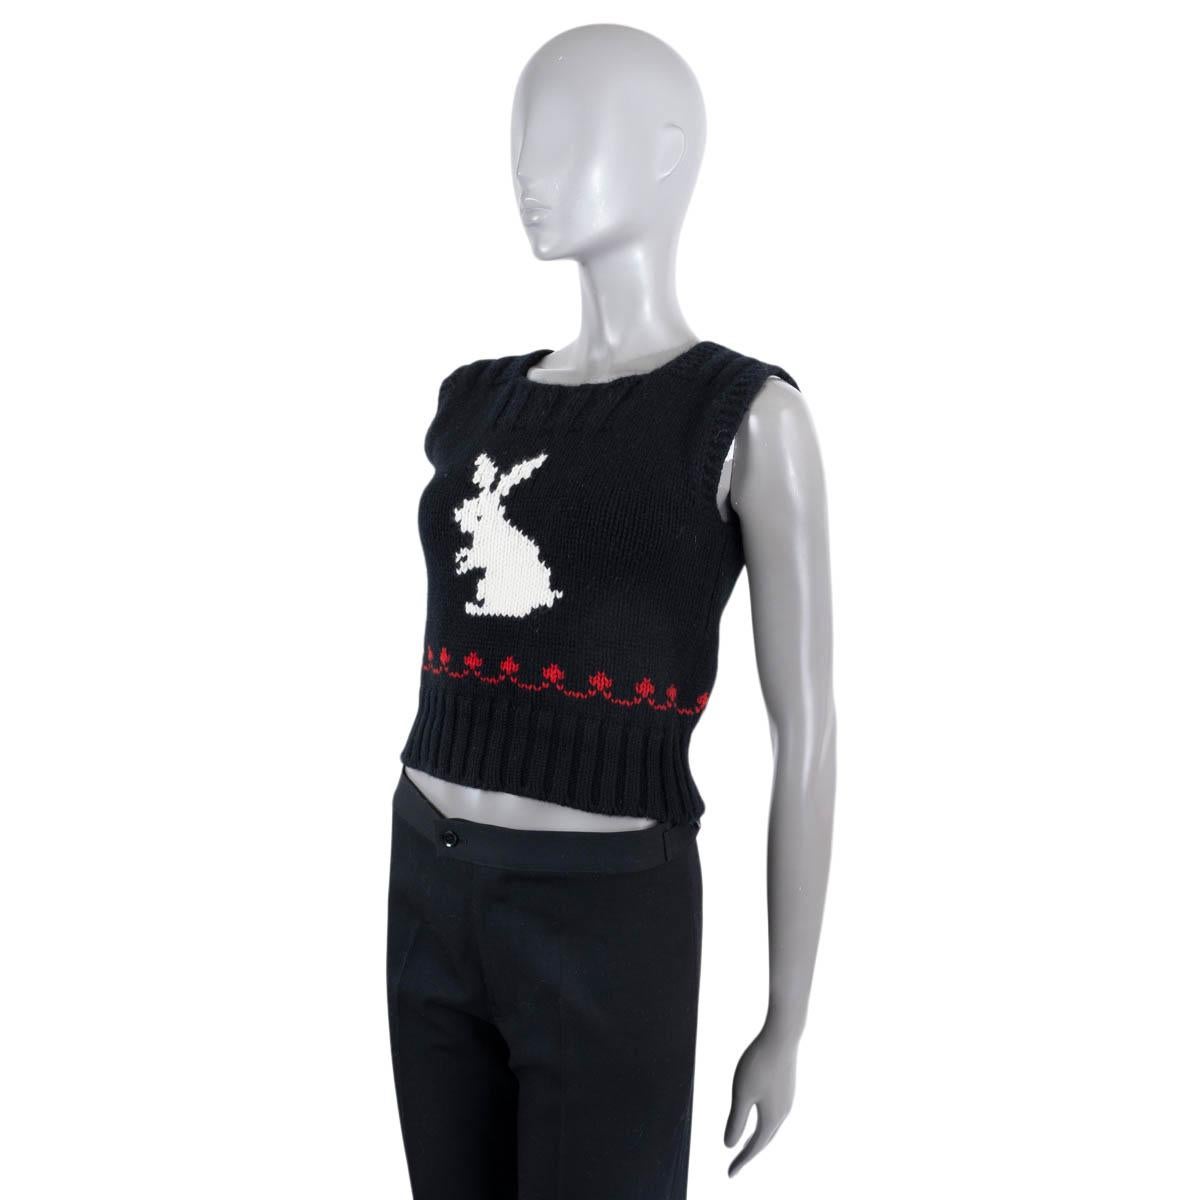 Christian Dior sweater vest in black wool (70%) and cashmere (30%). Features a cropped silhouette, chunky knit with rib-knit hem and neck and intarsia rabbit in white and details in red. Has been worn and is in excellent condition.

2021 DiorAmour